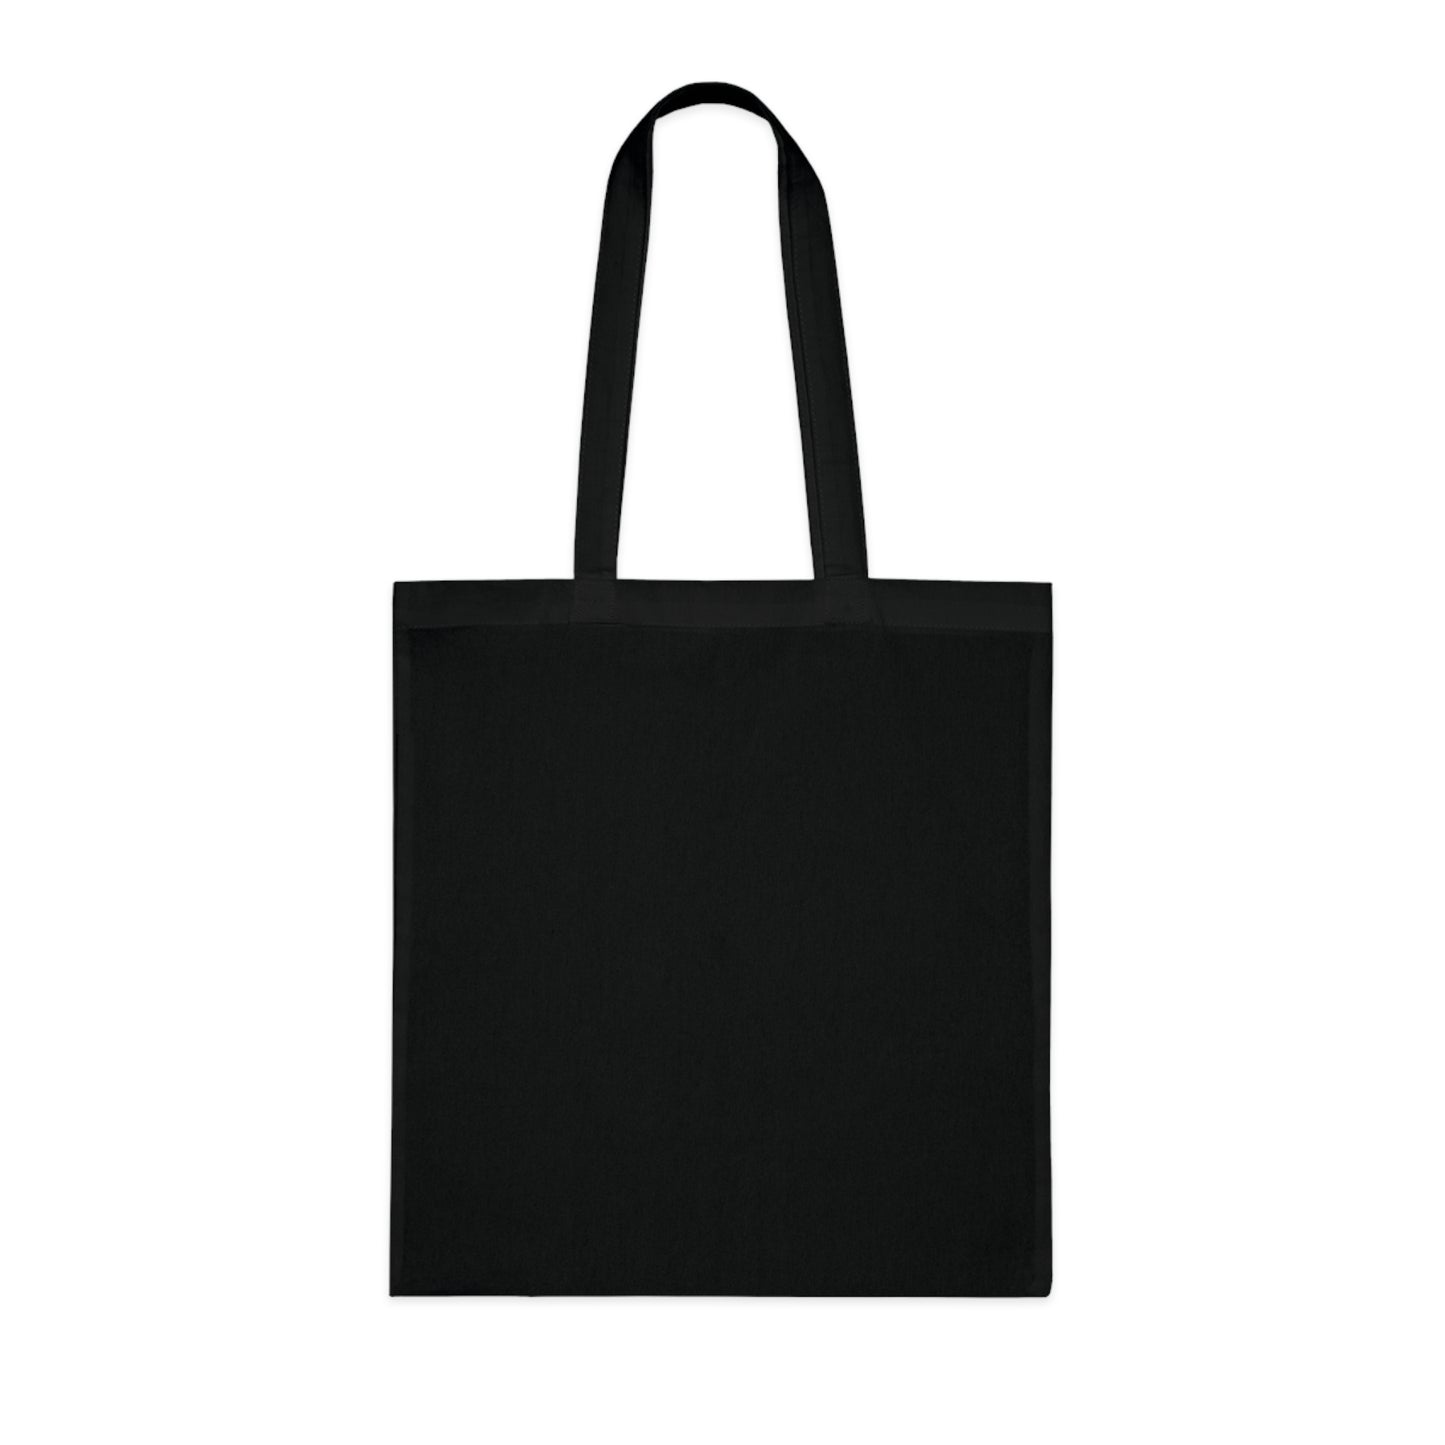 Throne Tote Bag